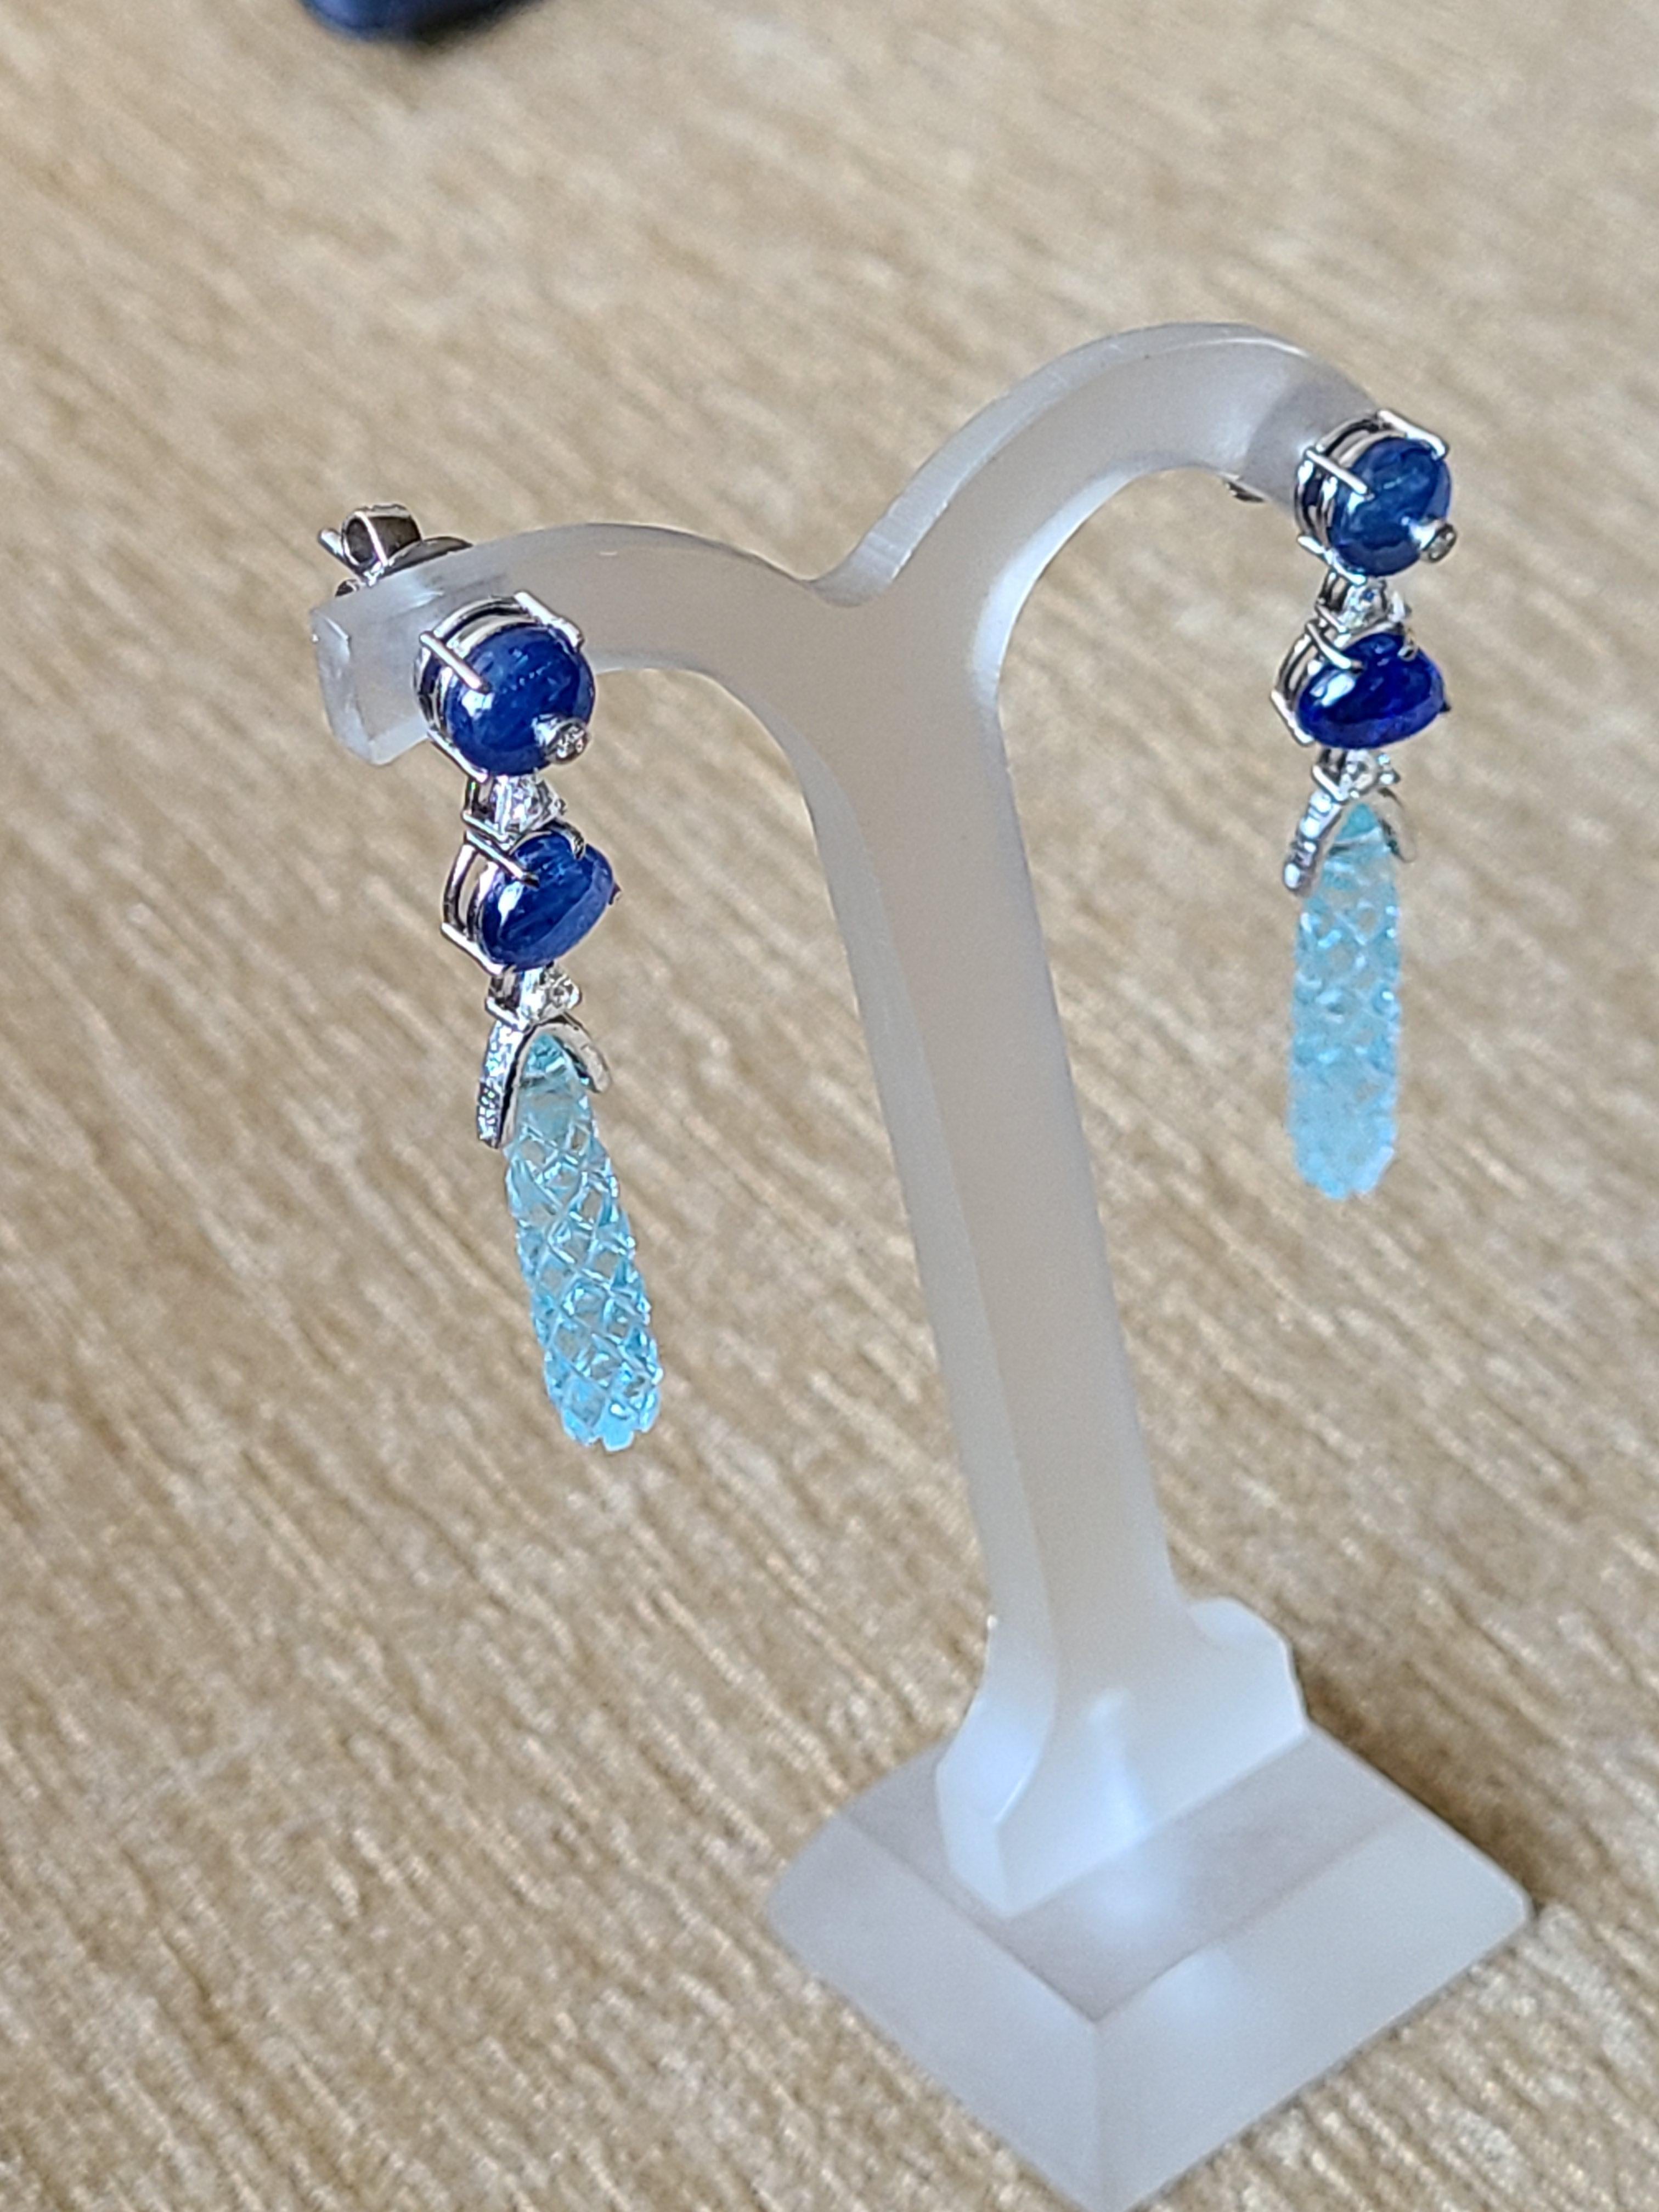 Cabochon Natural Aquamarine and Blue Sapphire Earrings Set in 18 Karat Gold with Diamonds